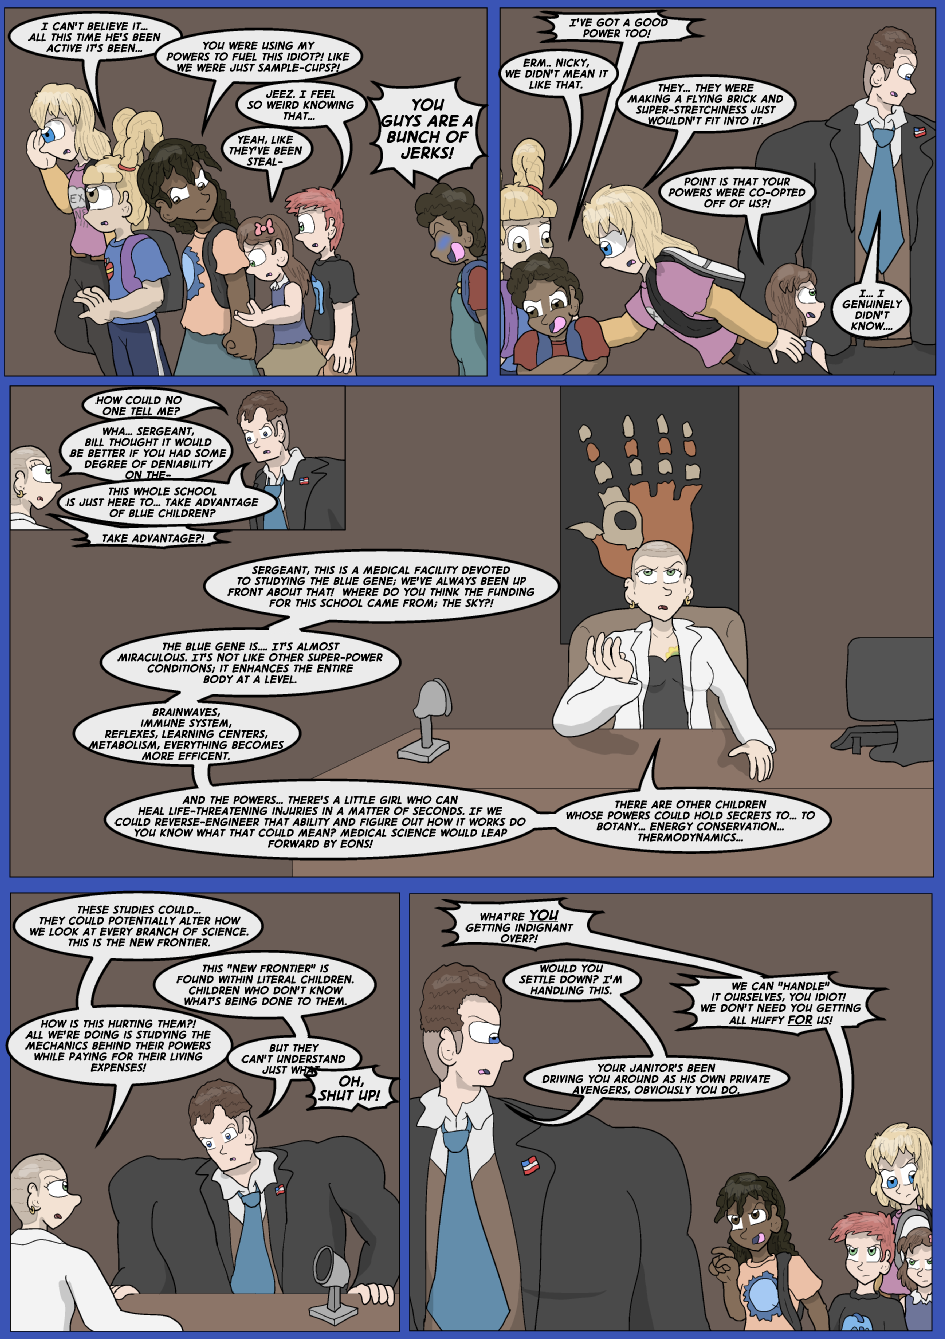 Showing Your Blue Colors- Page 8